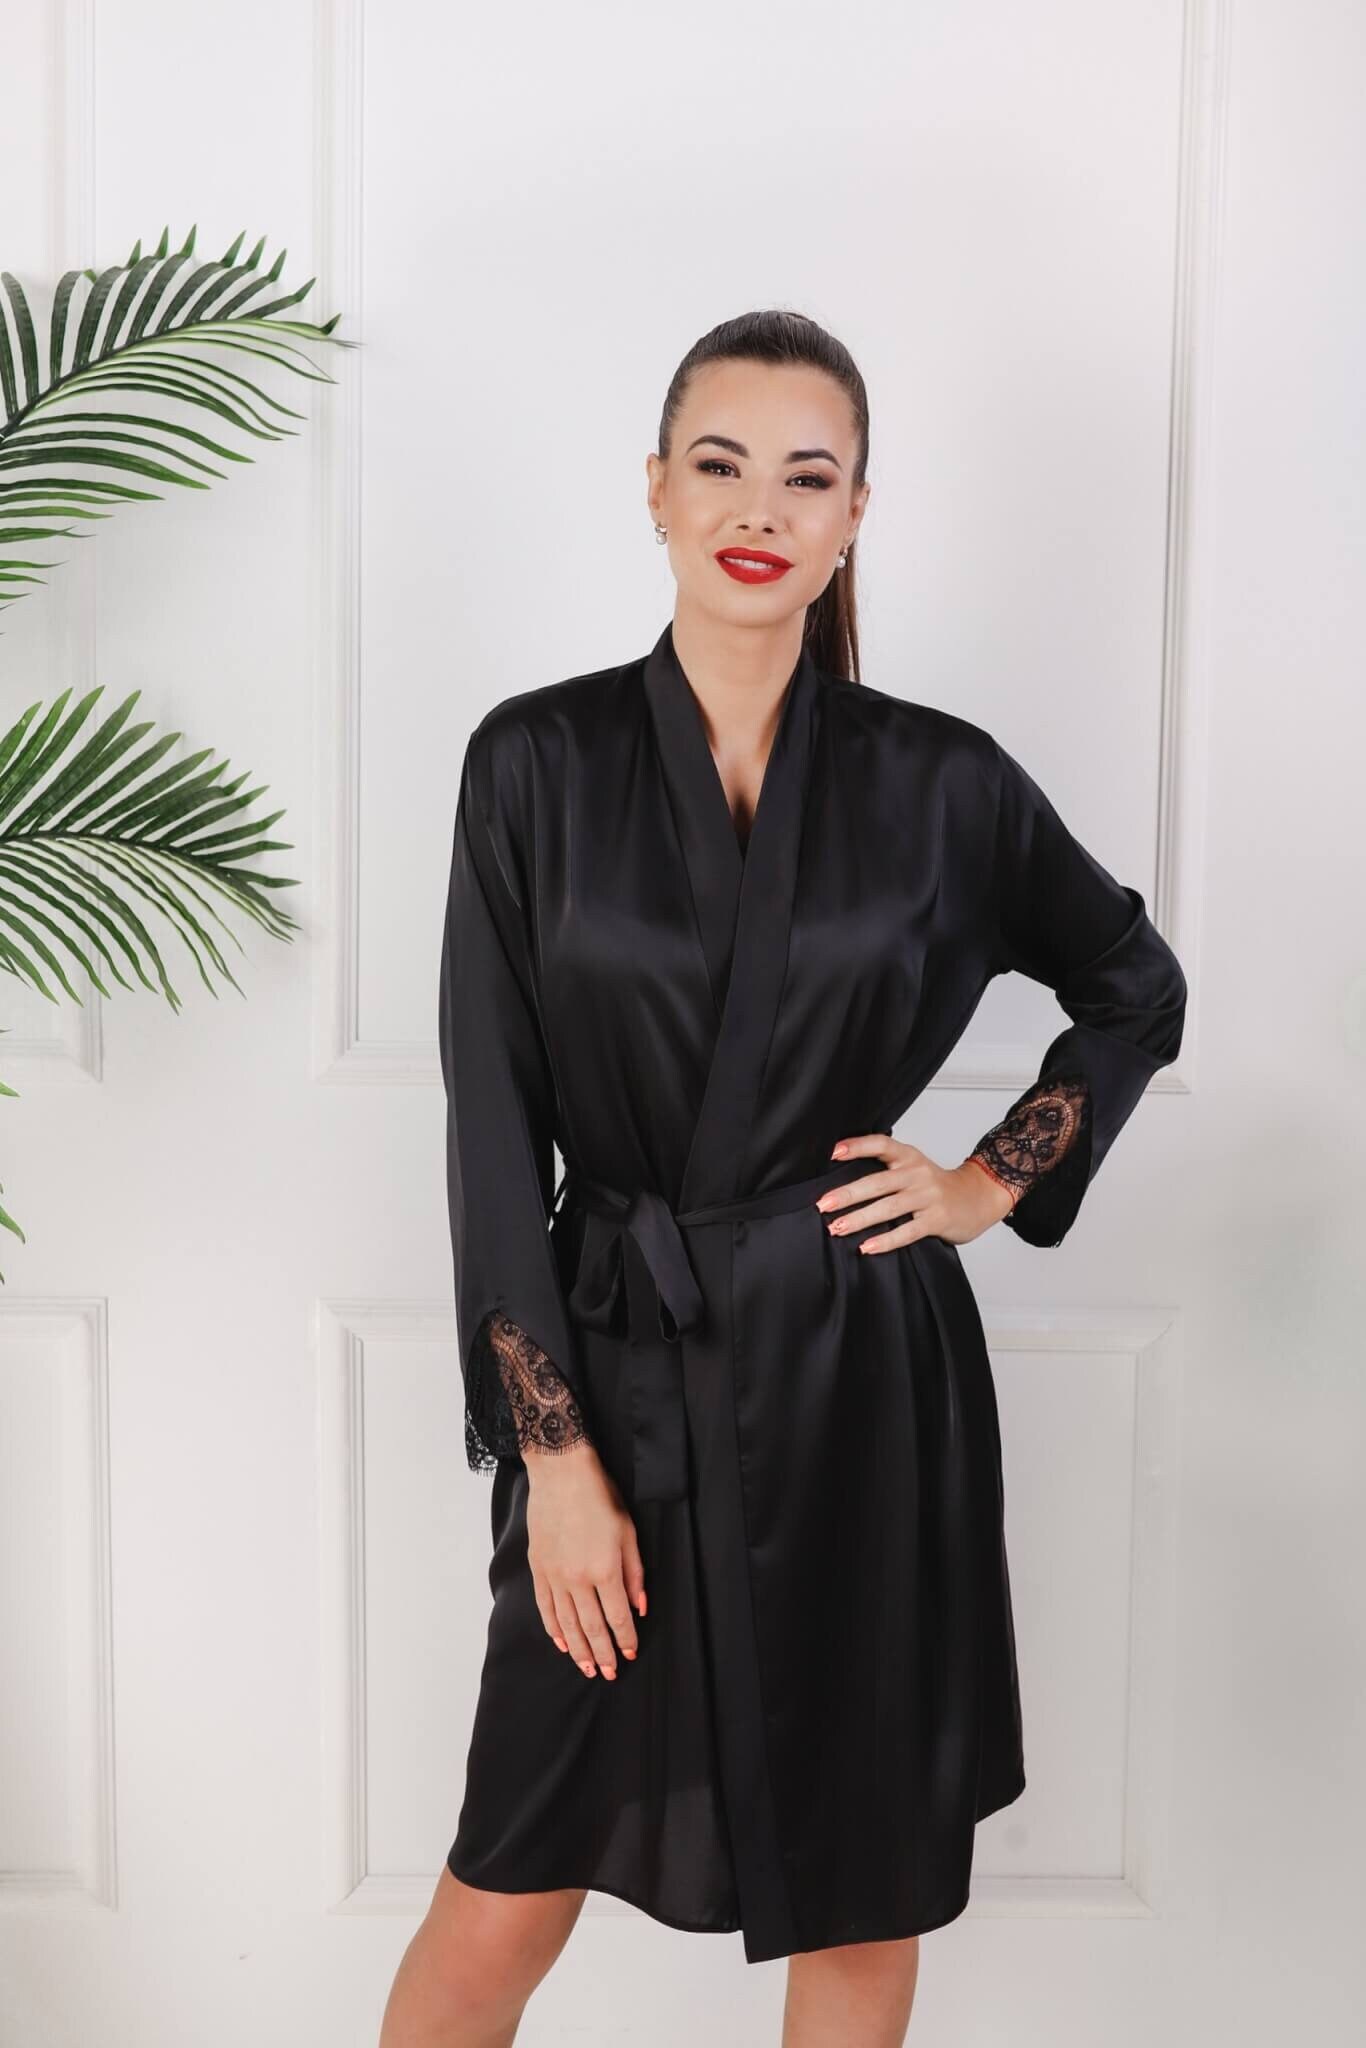 Women's Soft Long Satin Robes Long Silk Robes Full Length Robes Kimonos  Silky Bath Robe Dressing Gowns, Floral Print Black, XX-Large-3X-Large :  Amazon.in: Clothing & Accessories